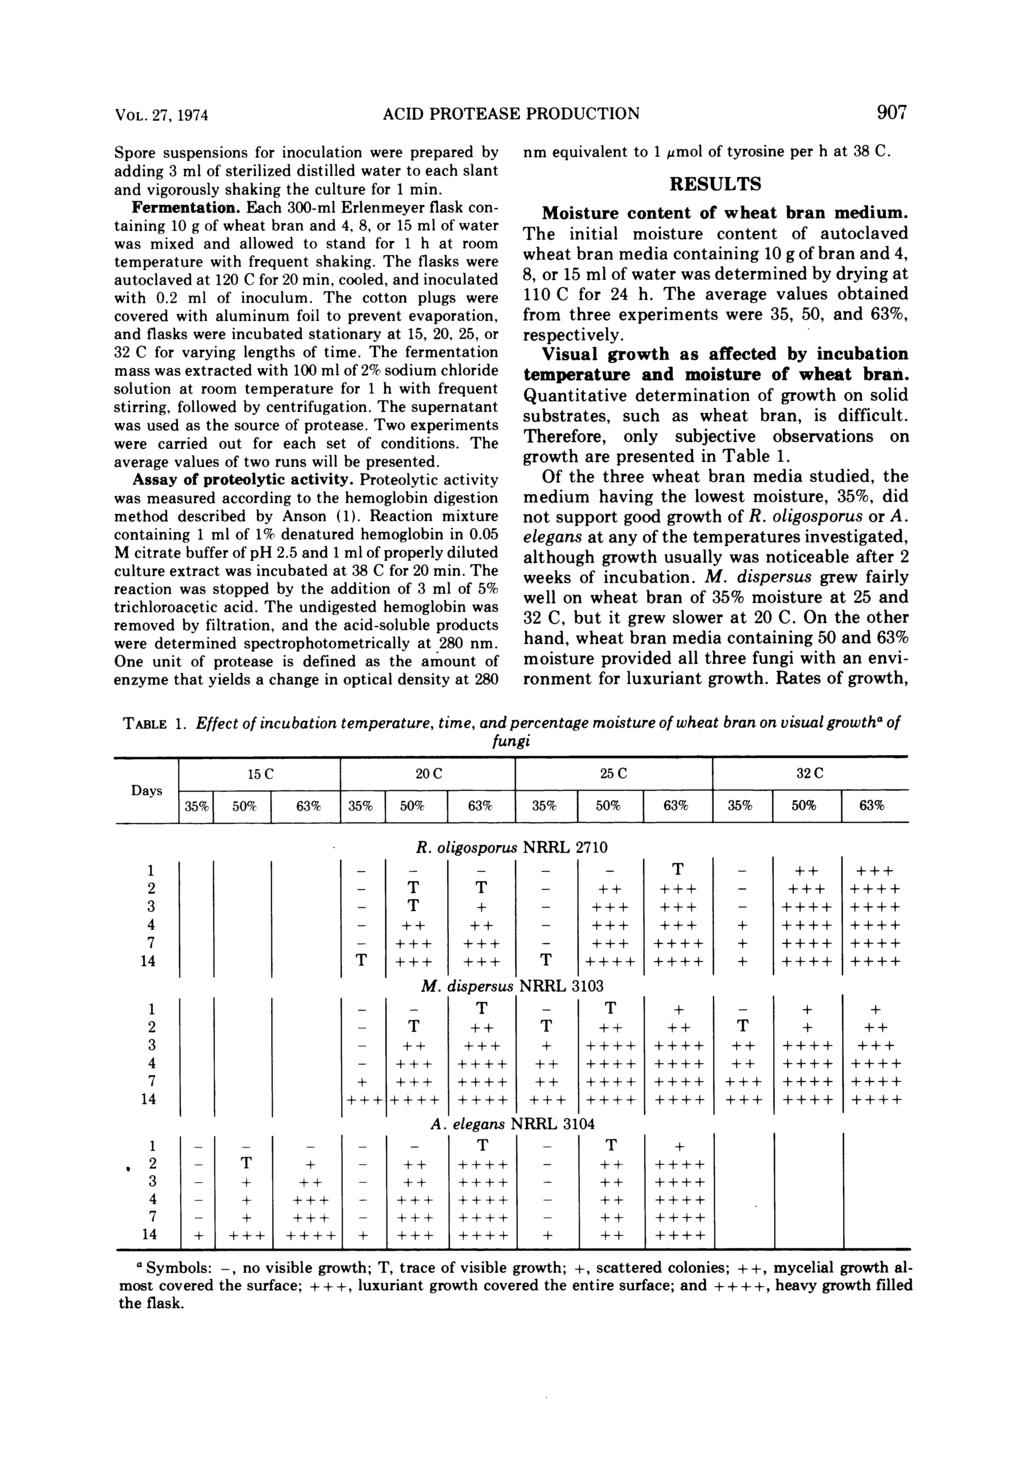 VOL. 27, 1974 Spore suspensions for inoculation were prepared by adding 3 ml of sterilized distilled water to each slant and vigorously shaking the culture for 1 min. Fermentation.